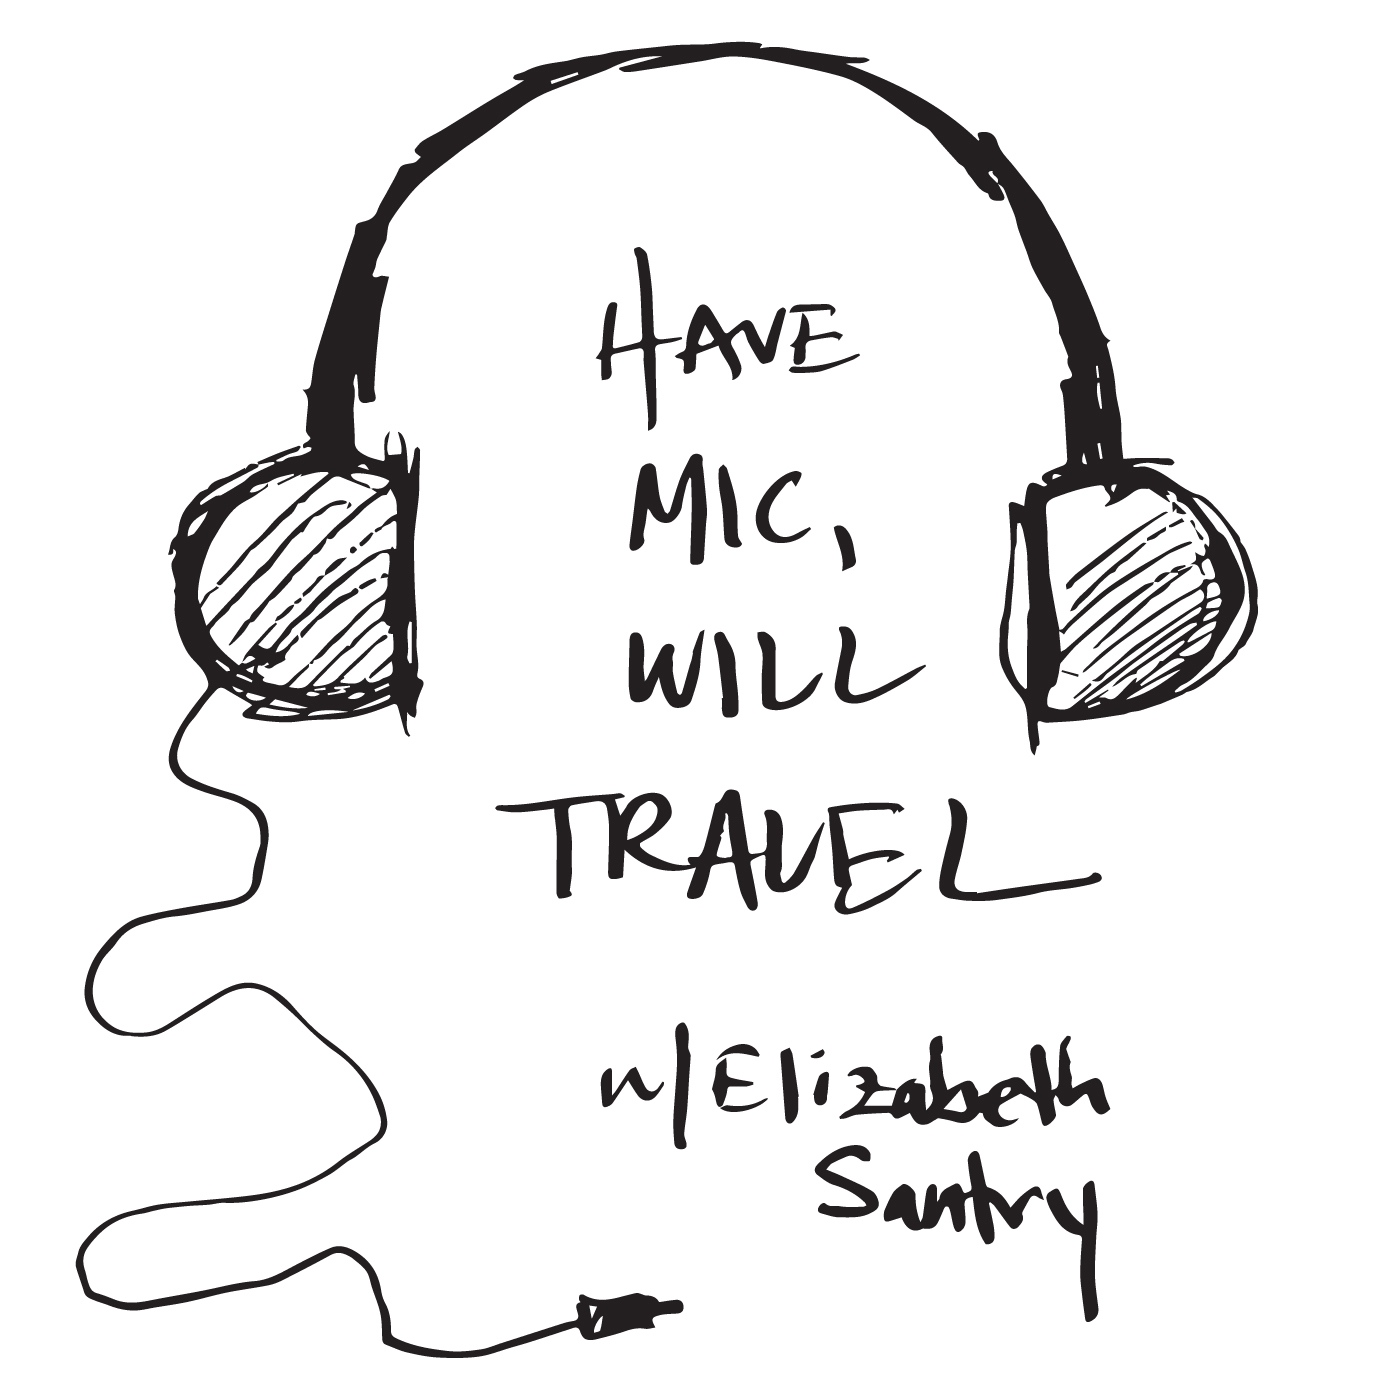 Have Mic Will Travel Podcast